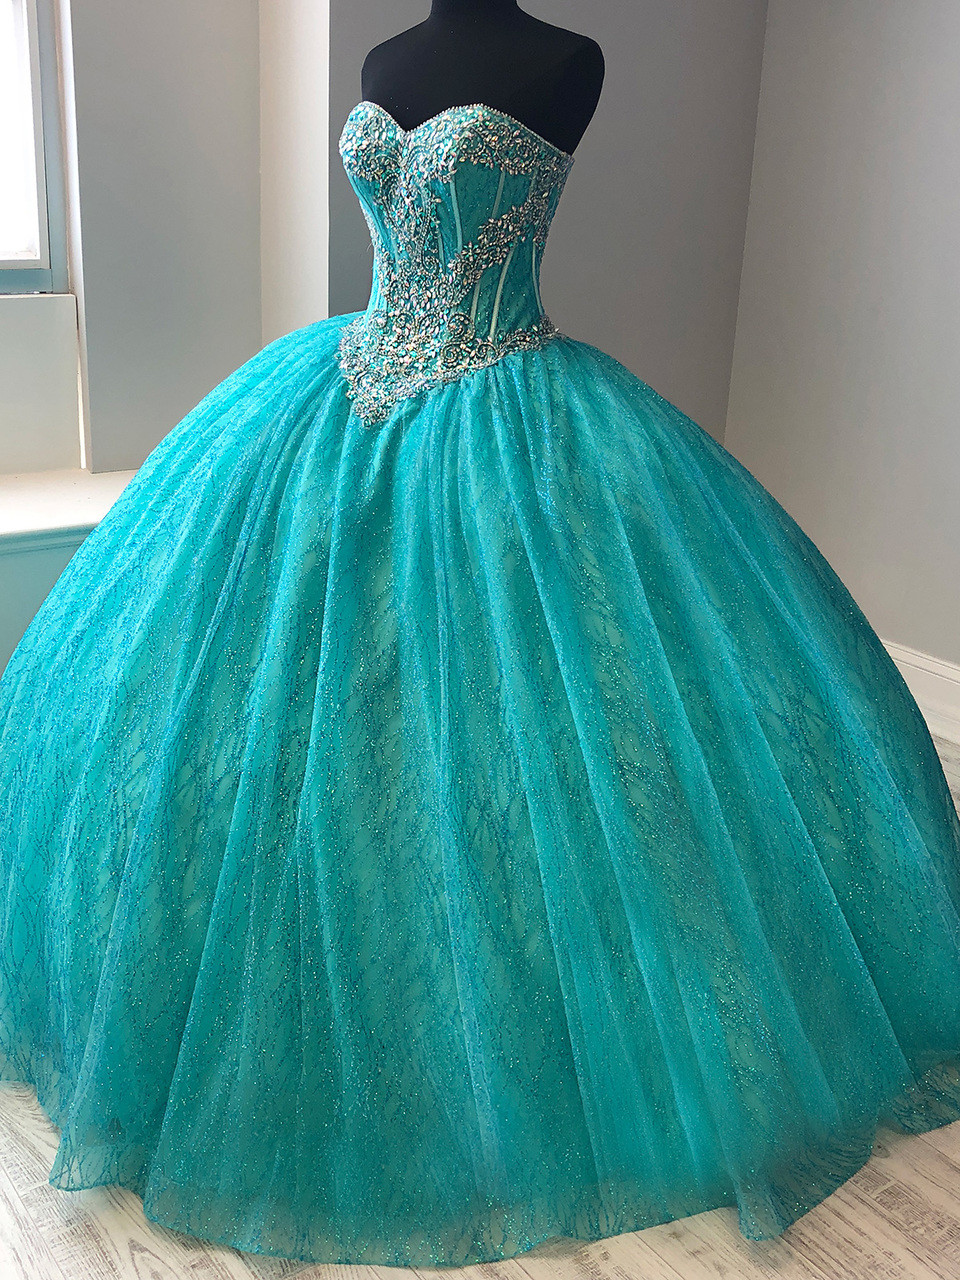 Sweetheart Quinceanera Collection Ball Gown Dress 26896 ...